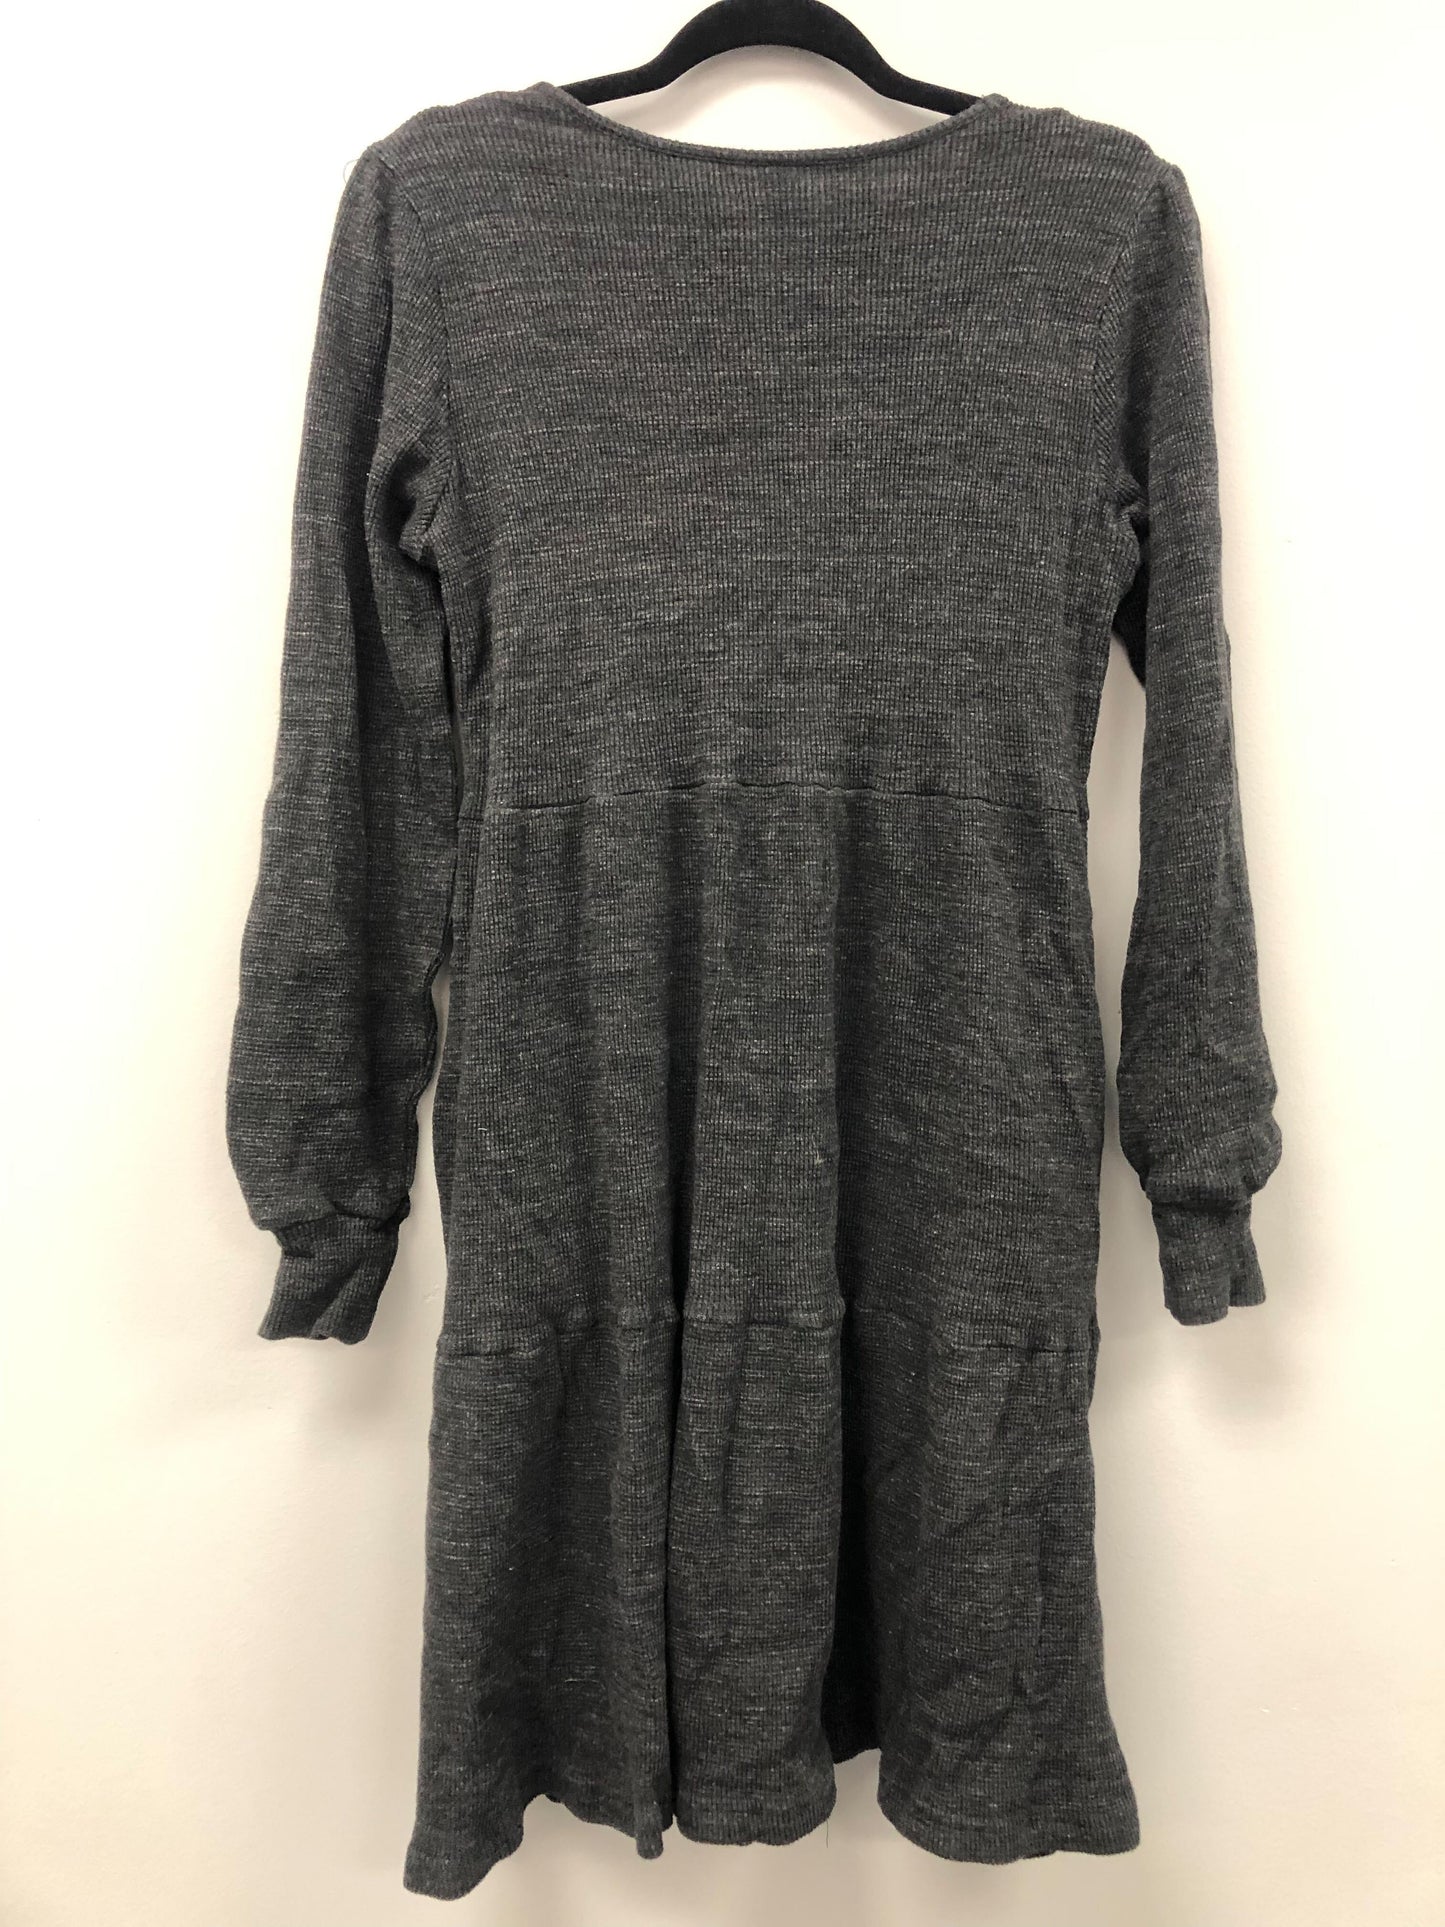 Outlet 5498 - Latched Mama Waffle Knit Nursing Dress - Dark Charcoal - Extra Large